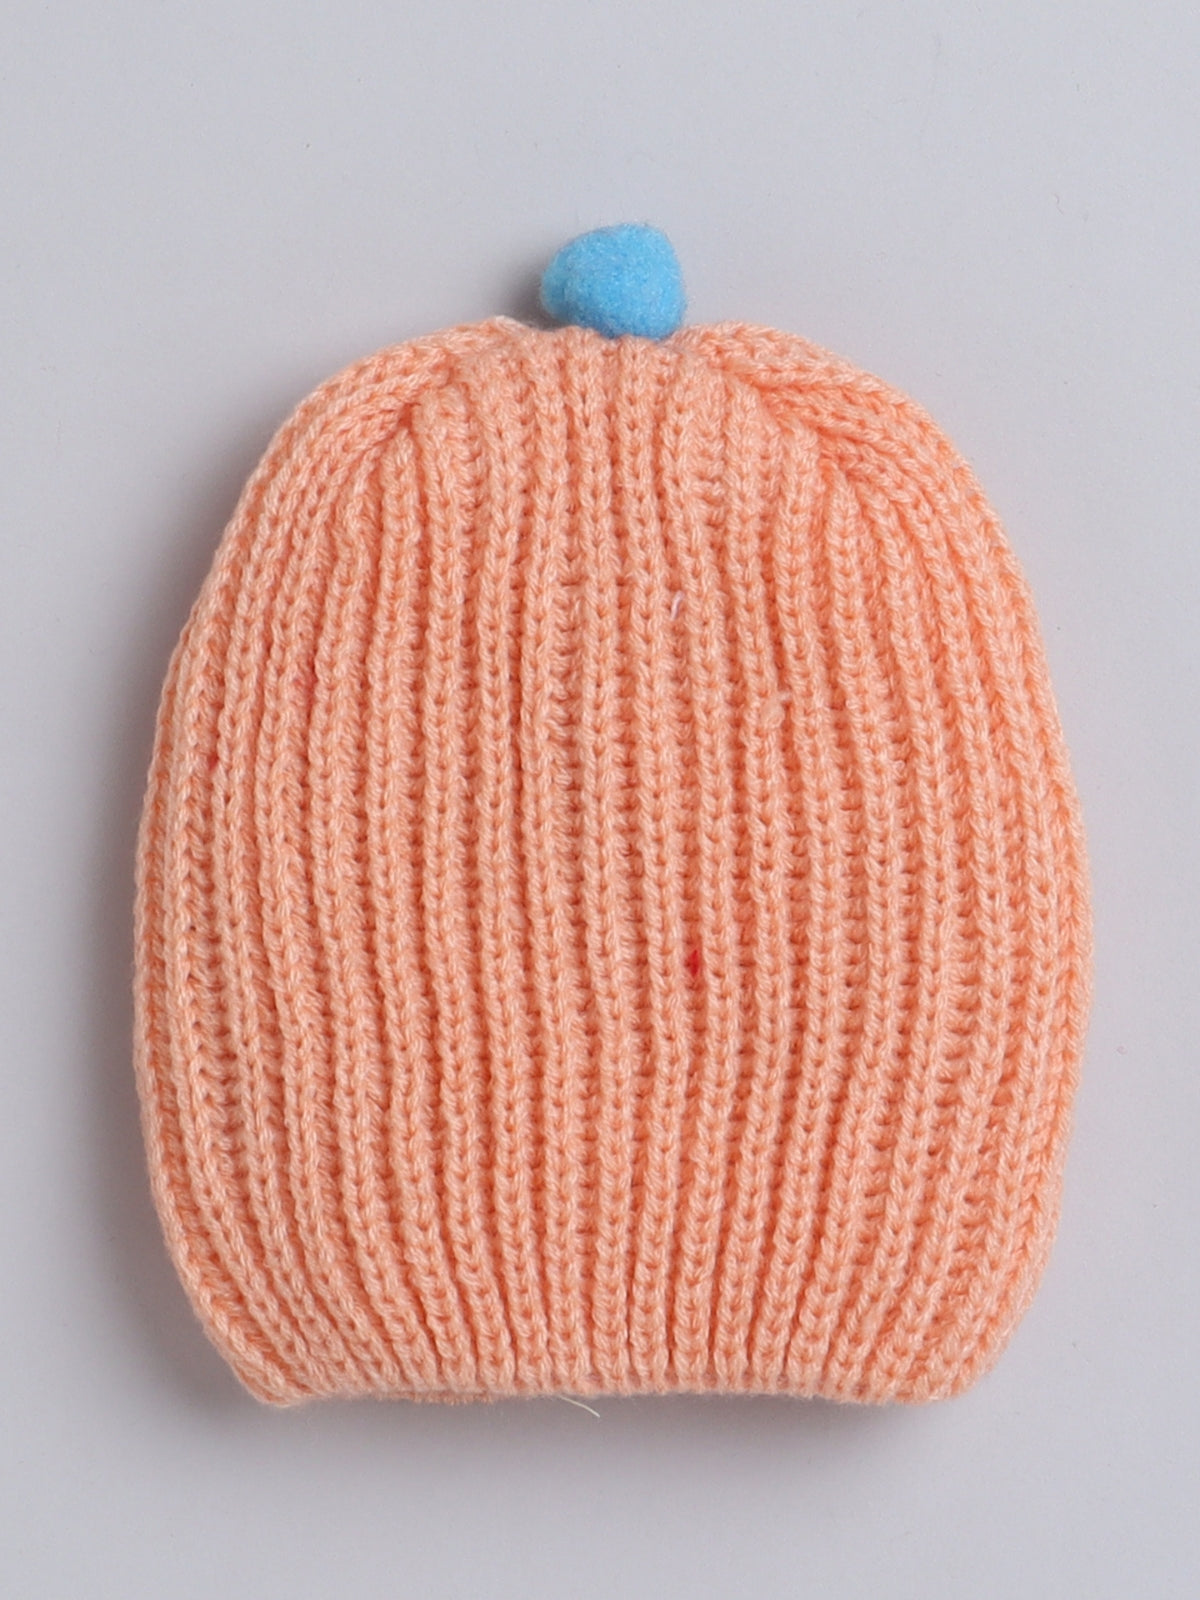 Knited Peach color round cap for baby